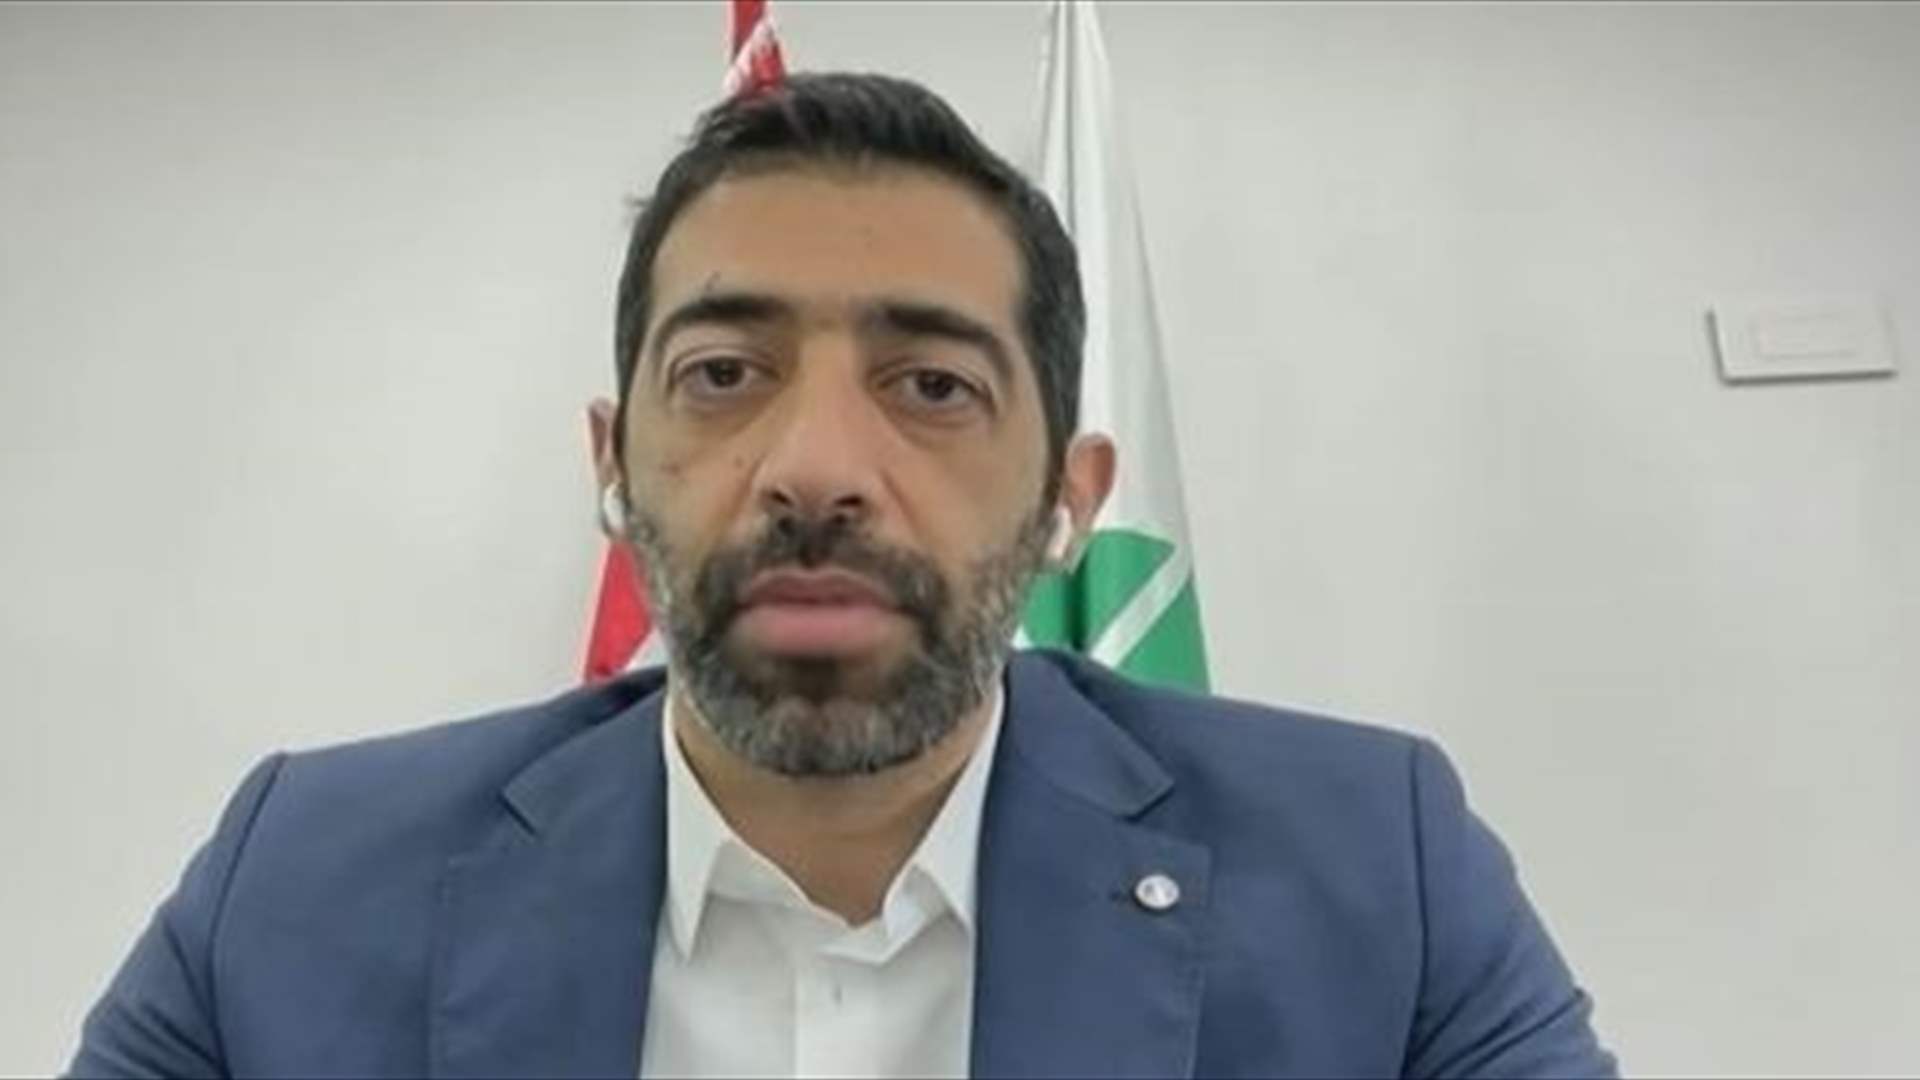 MP Hankash to LBCI: New president must raise problematic issues